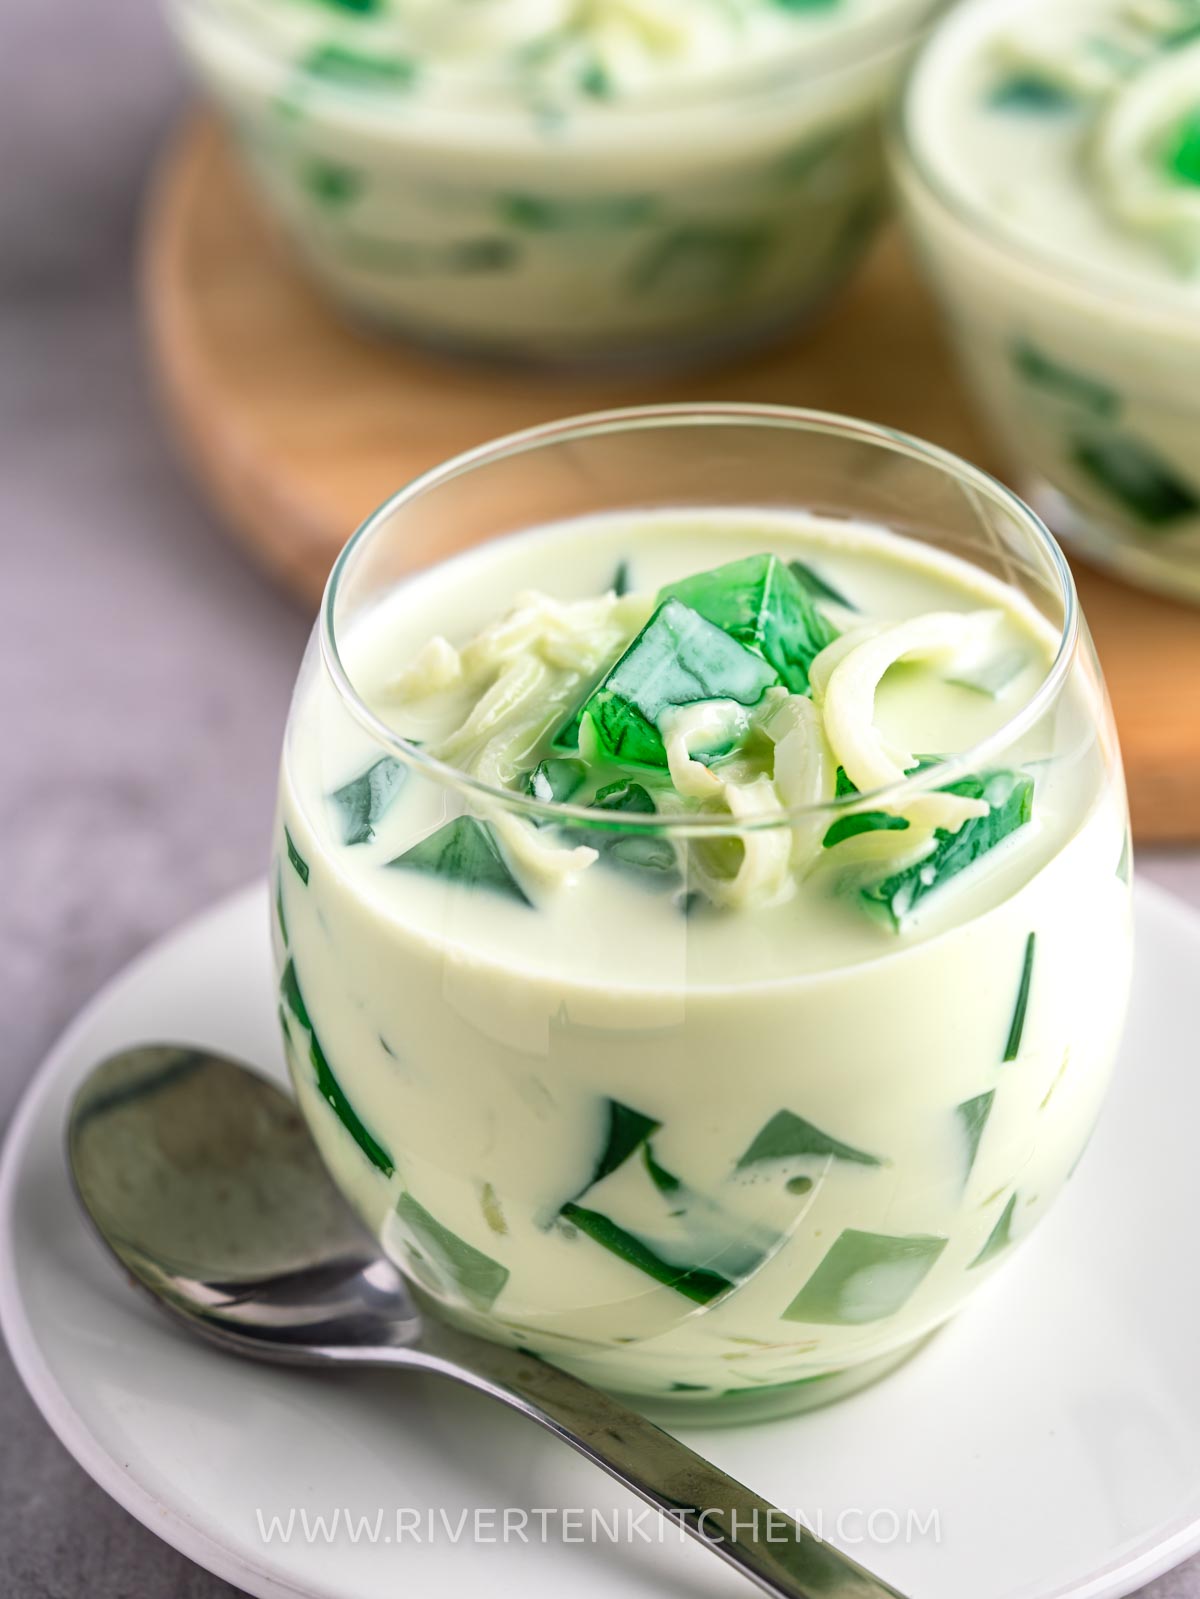 coconut with pandan jelly, Cream and condensed milk